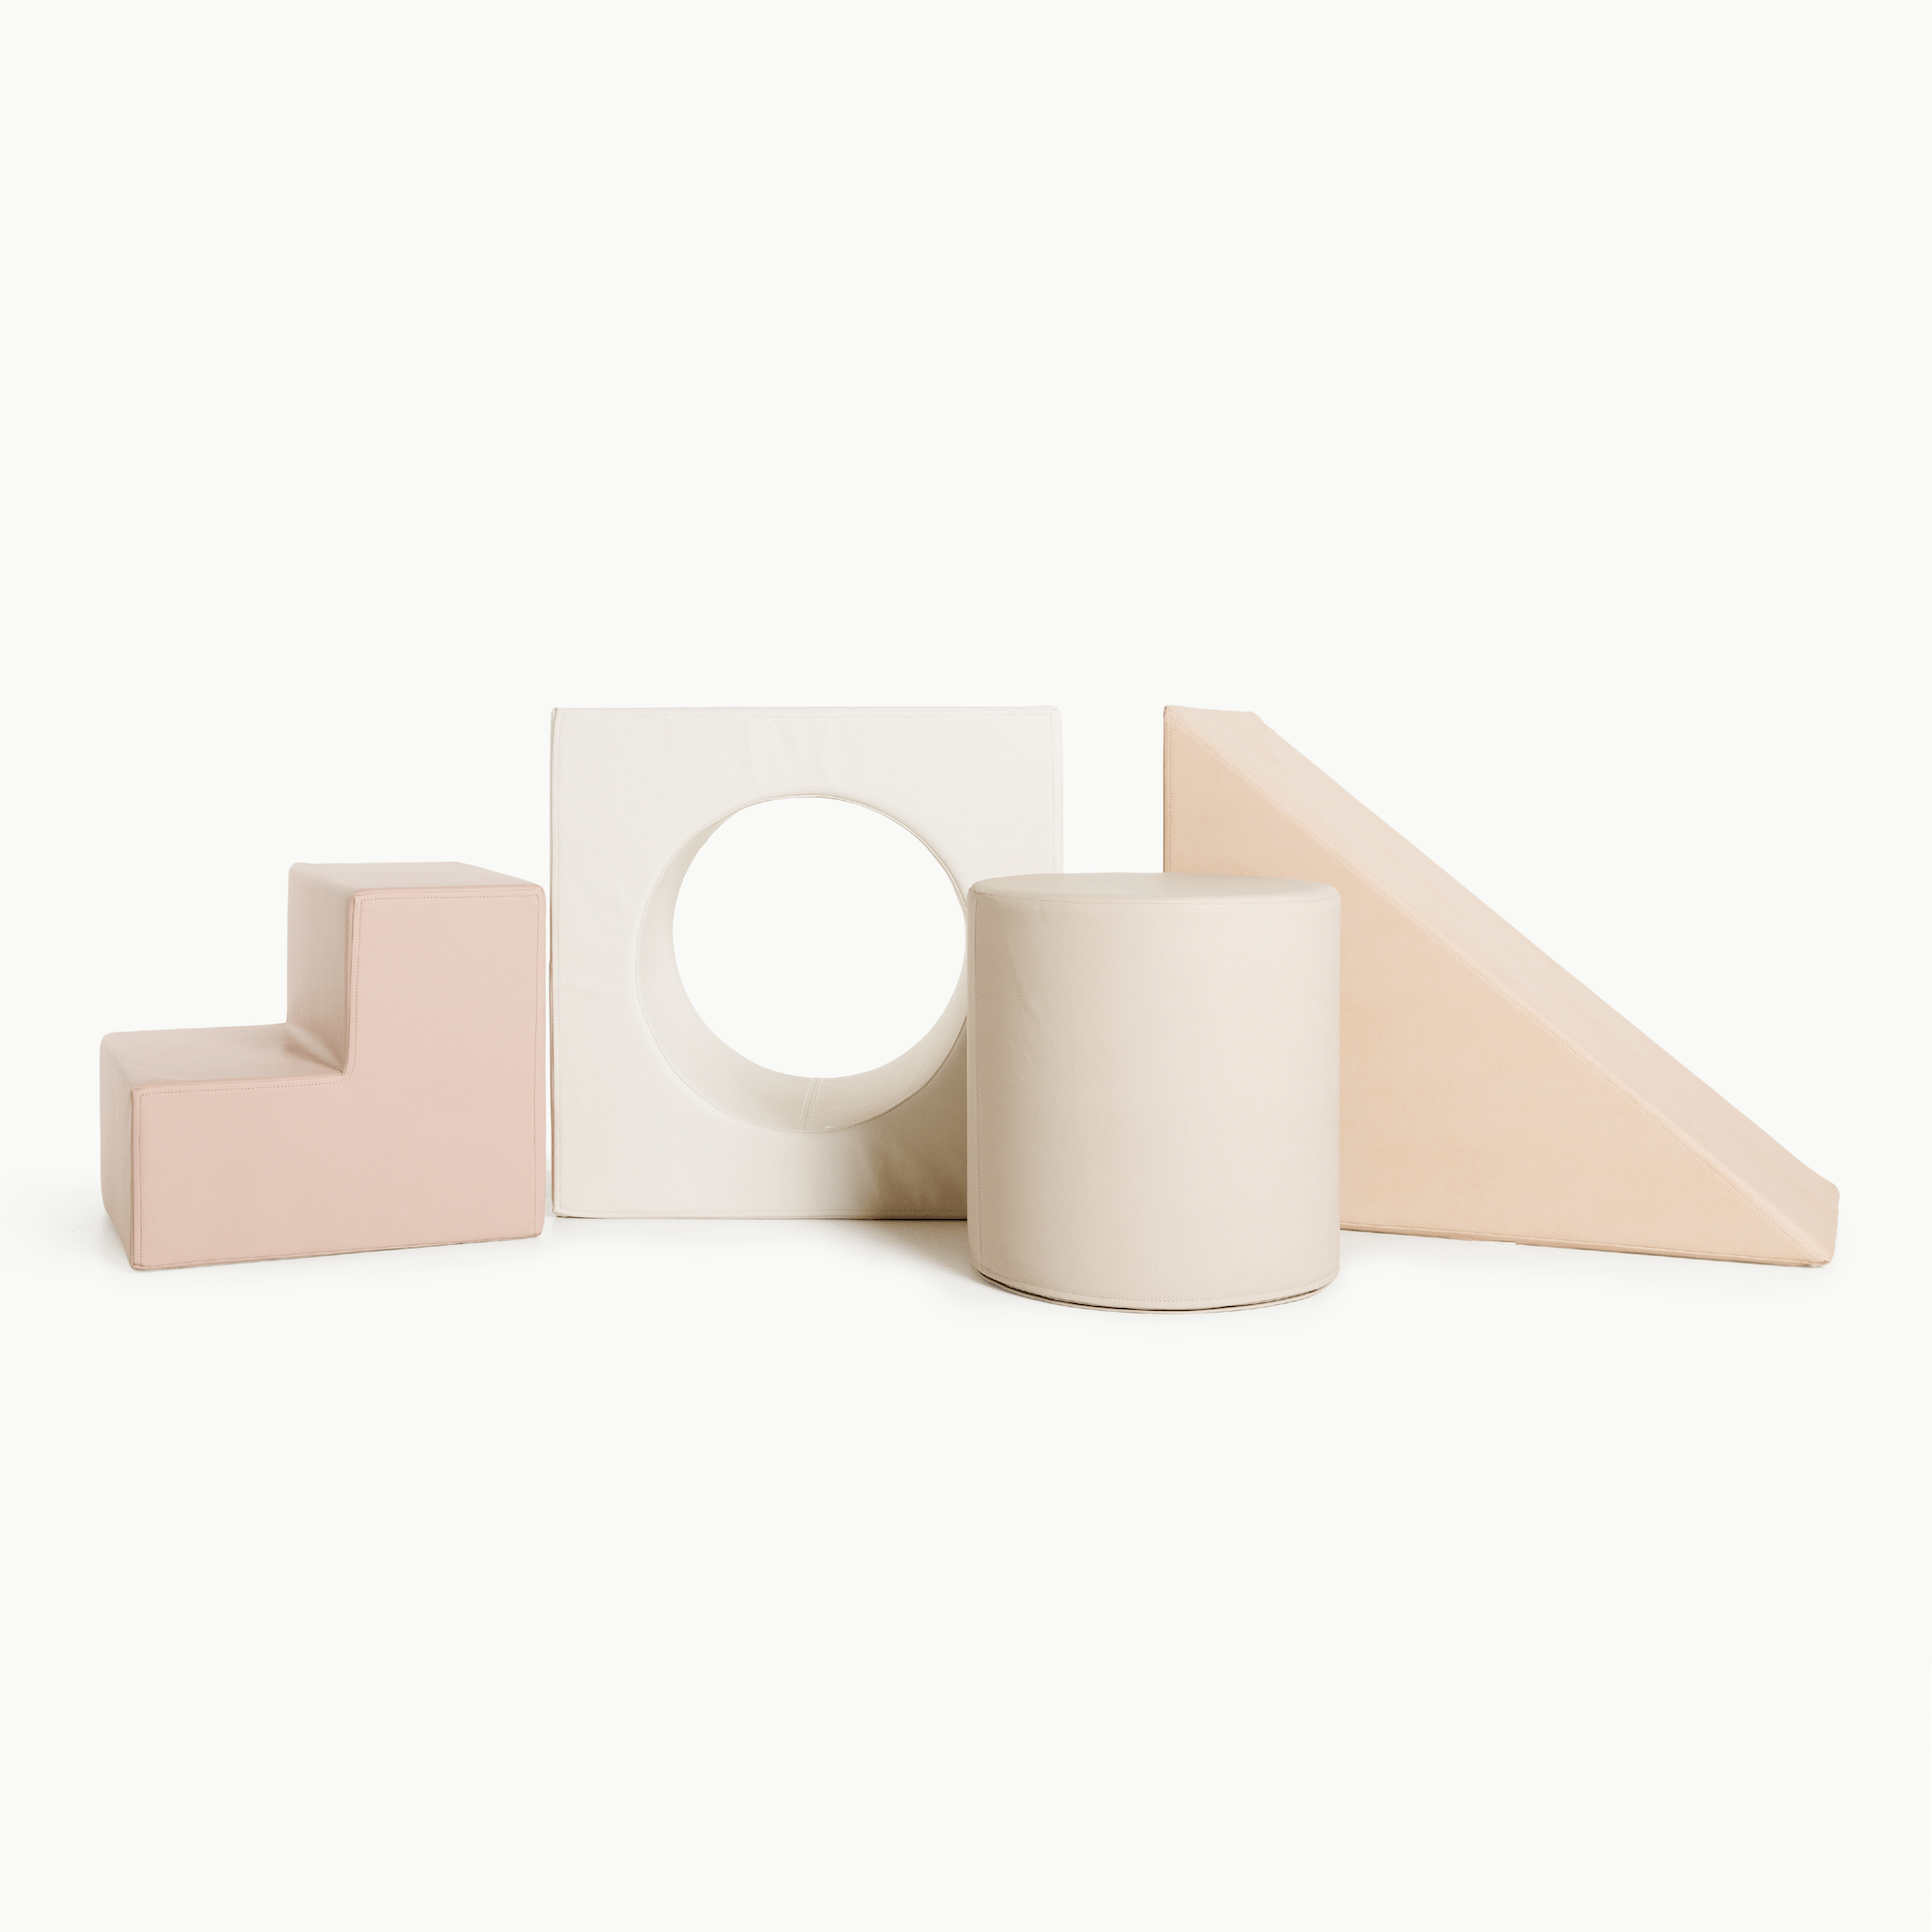 Tulle • Untanned • Millet • Ivory@the tulle block playset